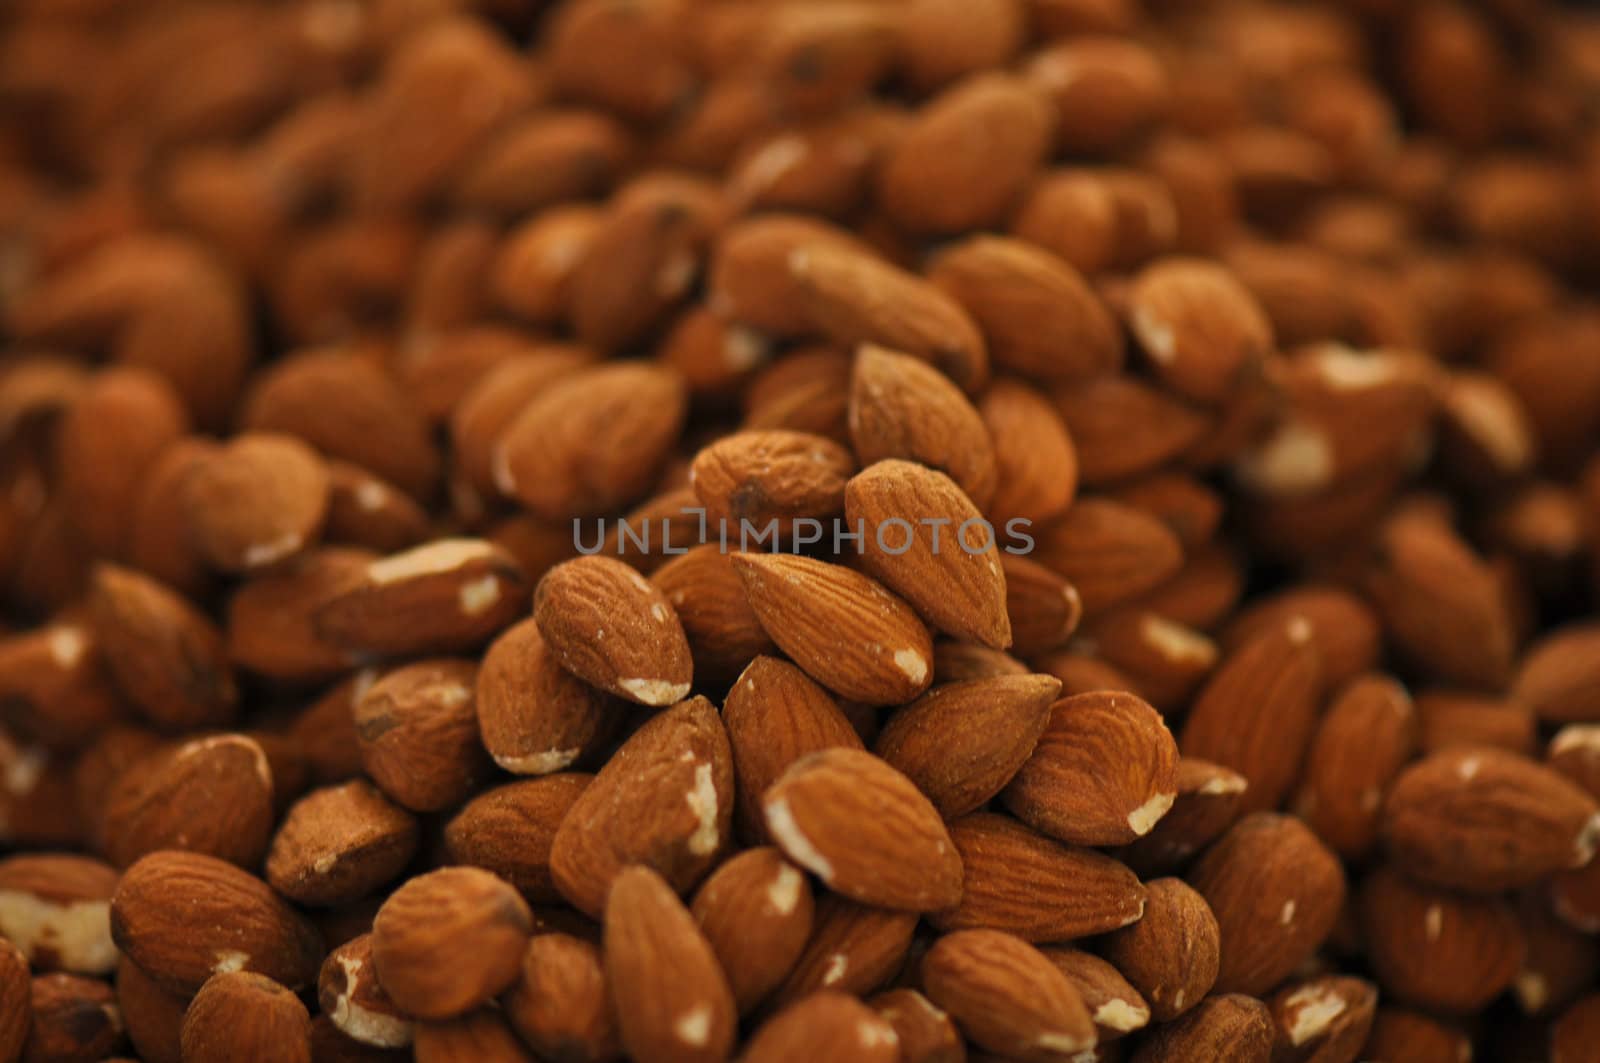 Tasty and Delicious Almonds ready to be eaten as healthy snack